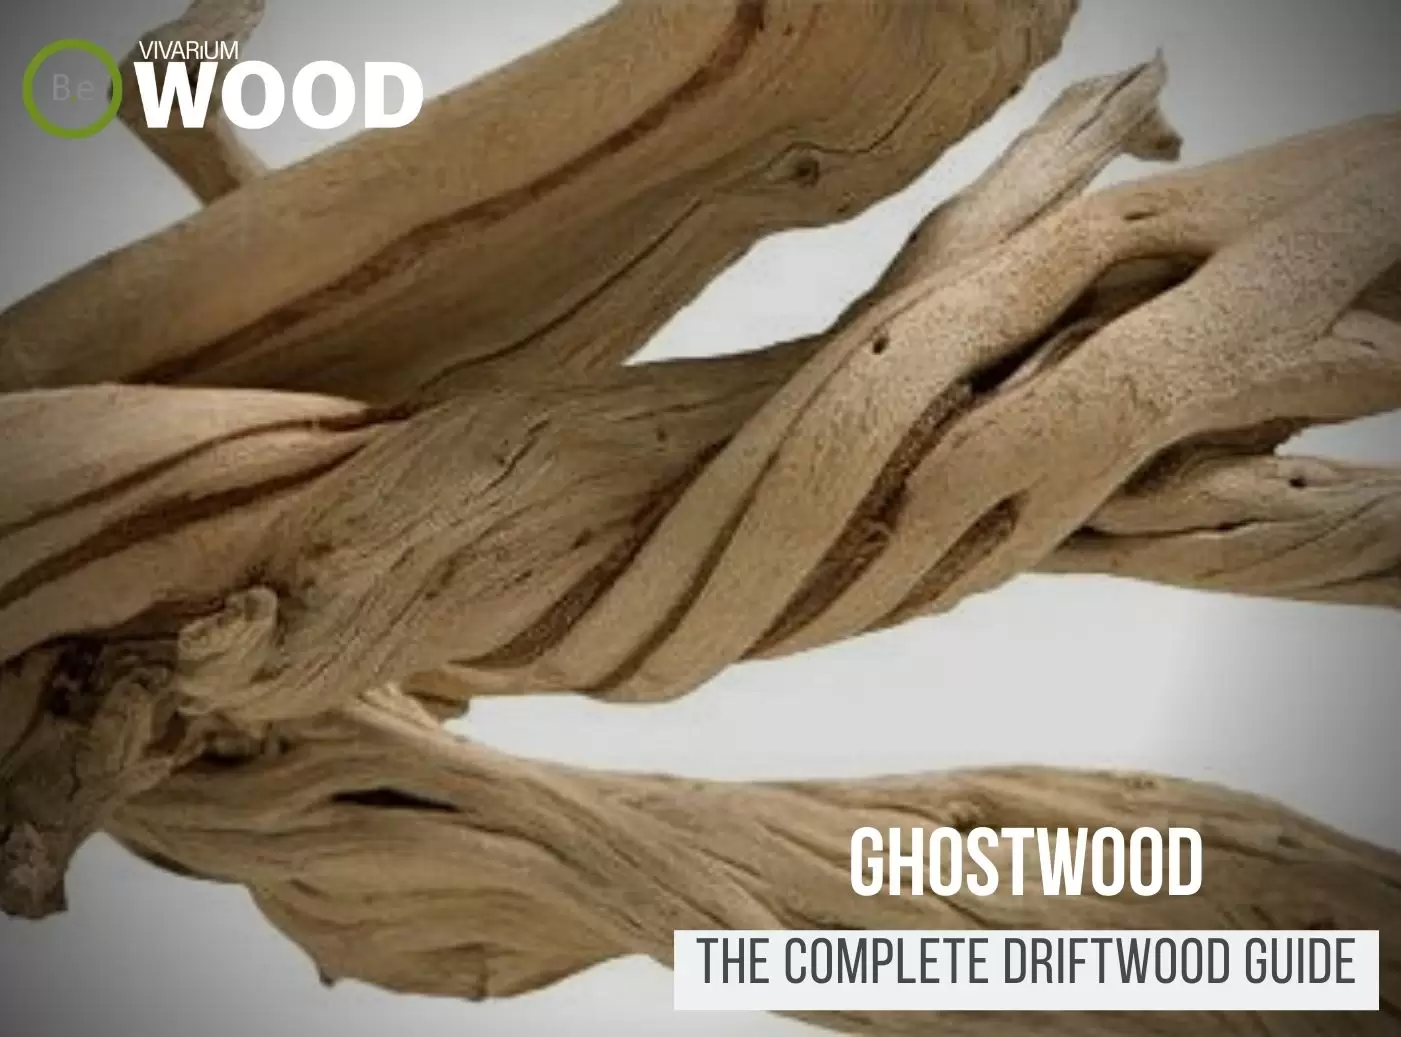 California Driftwood "Ghostwood" - The Hardscape Guide